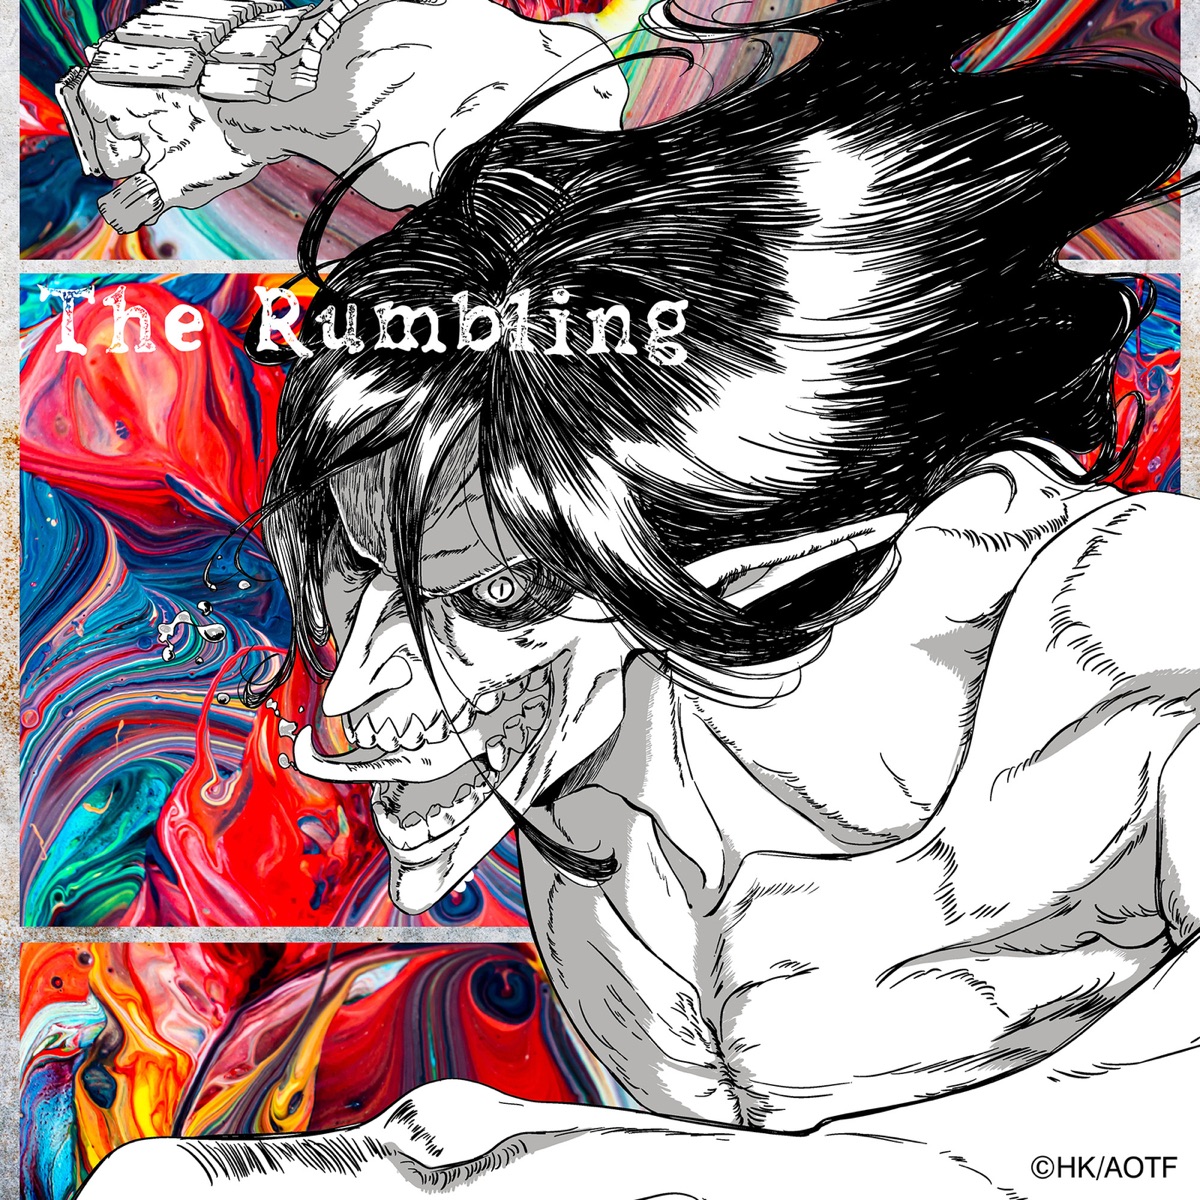 Cover for『SiM - The Rumbling』from the release『The Rumbling』